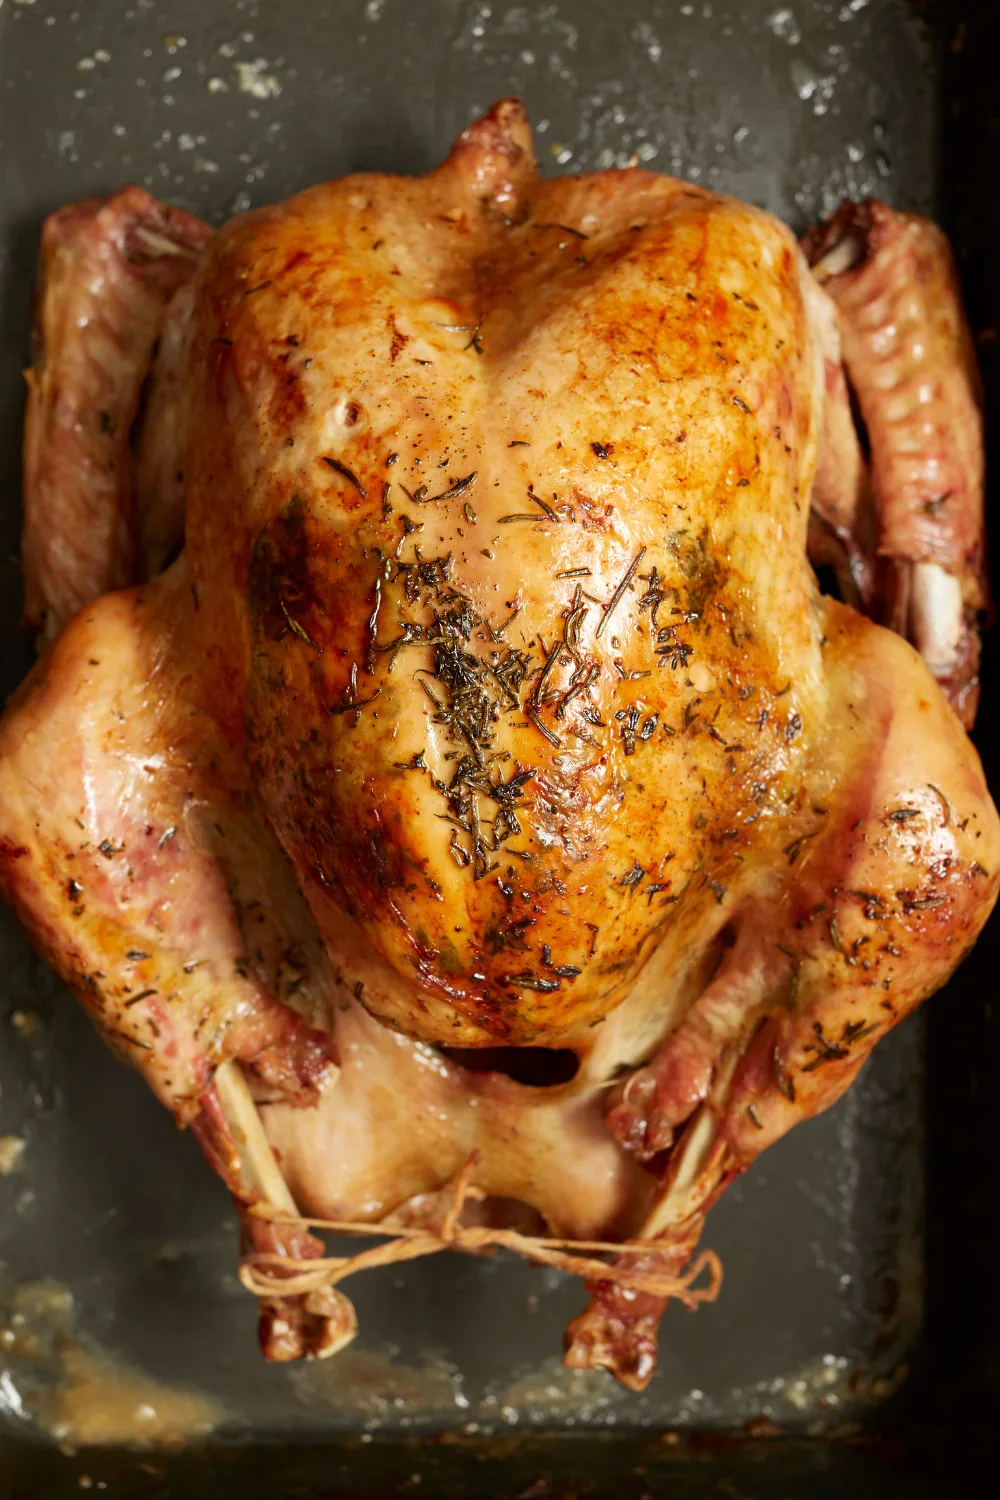 https://www.midlifehealthyliving.com/wp-content/uploads/2022/07/How-to-Cook-Frozen-Turkey-Images.png.webp